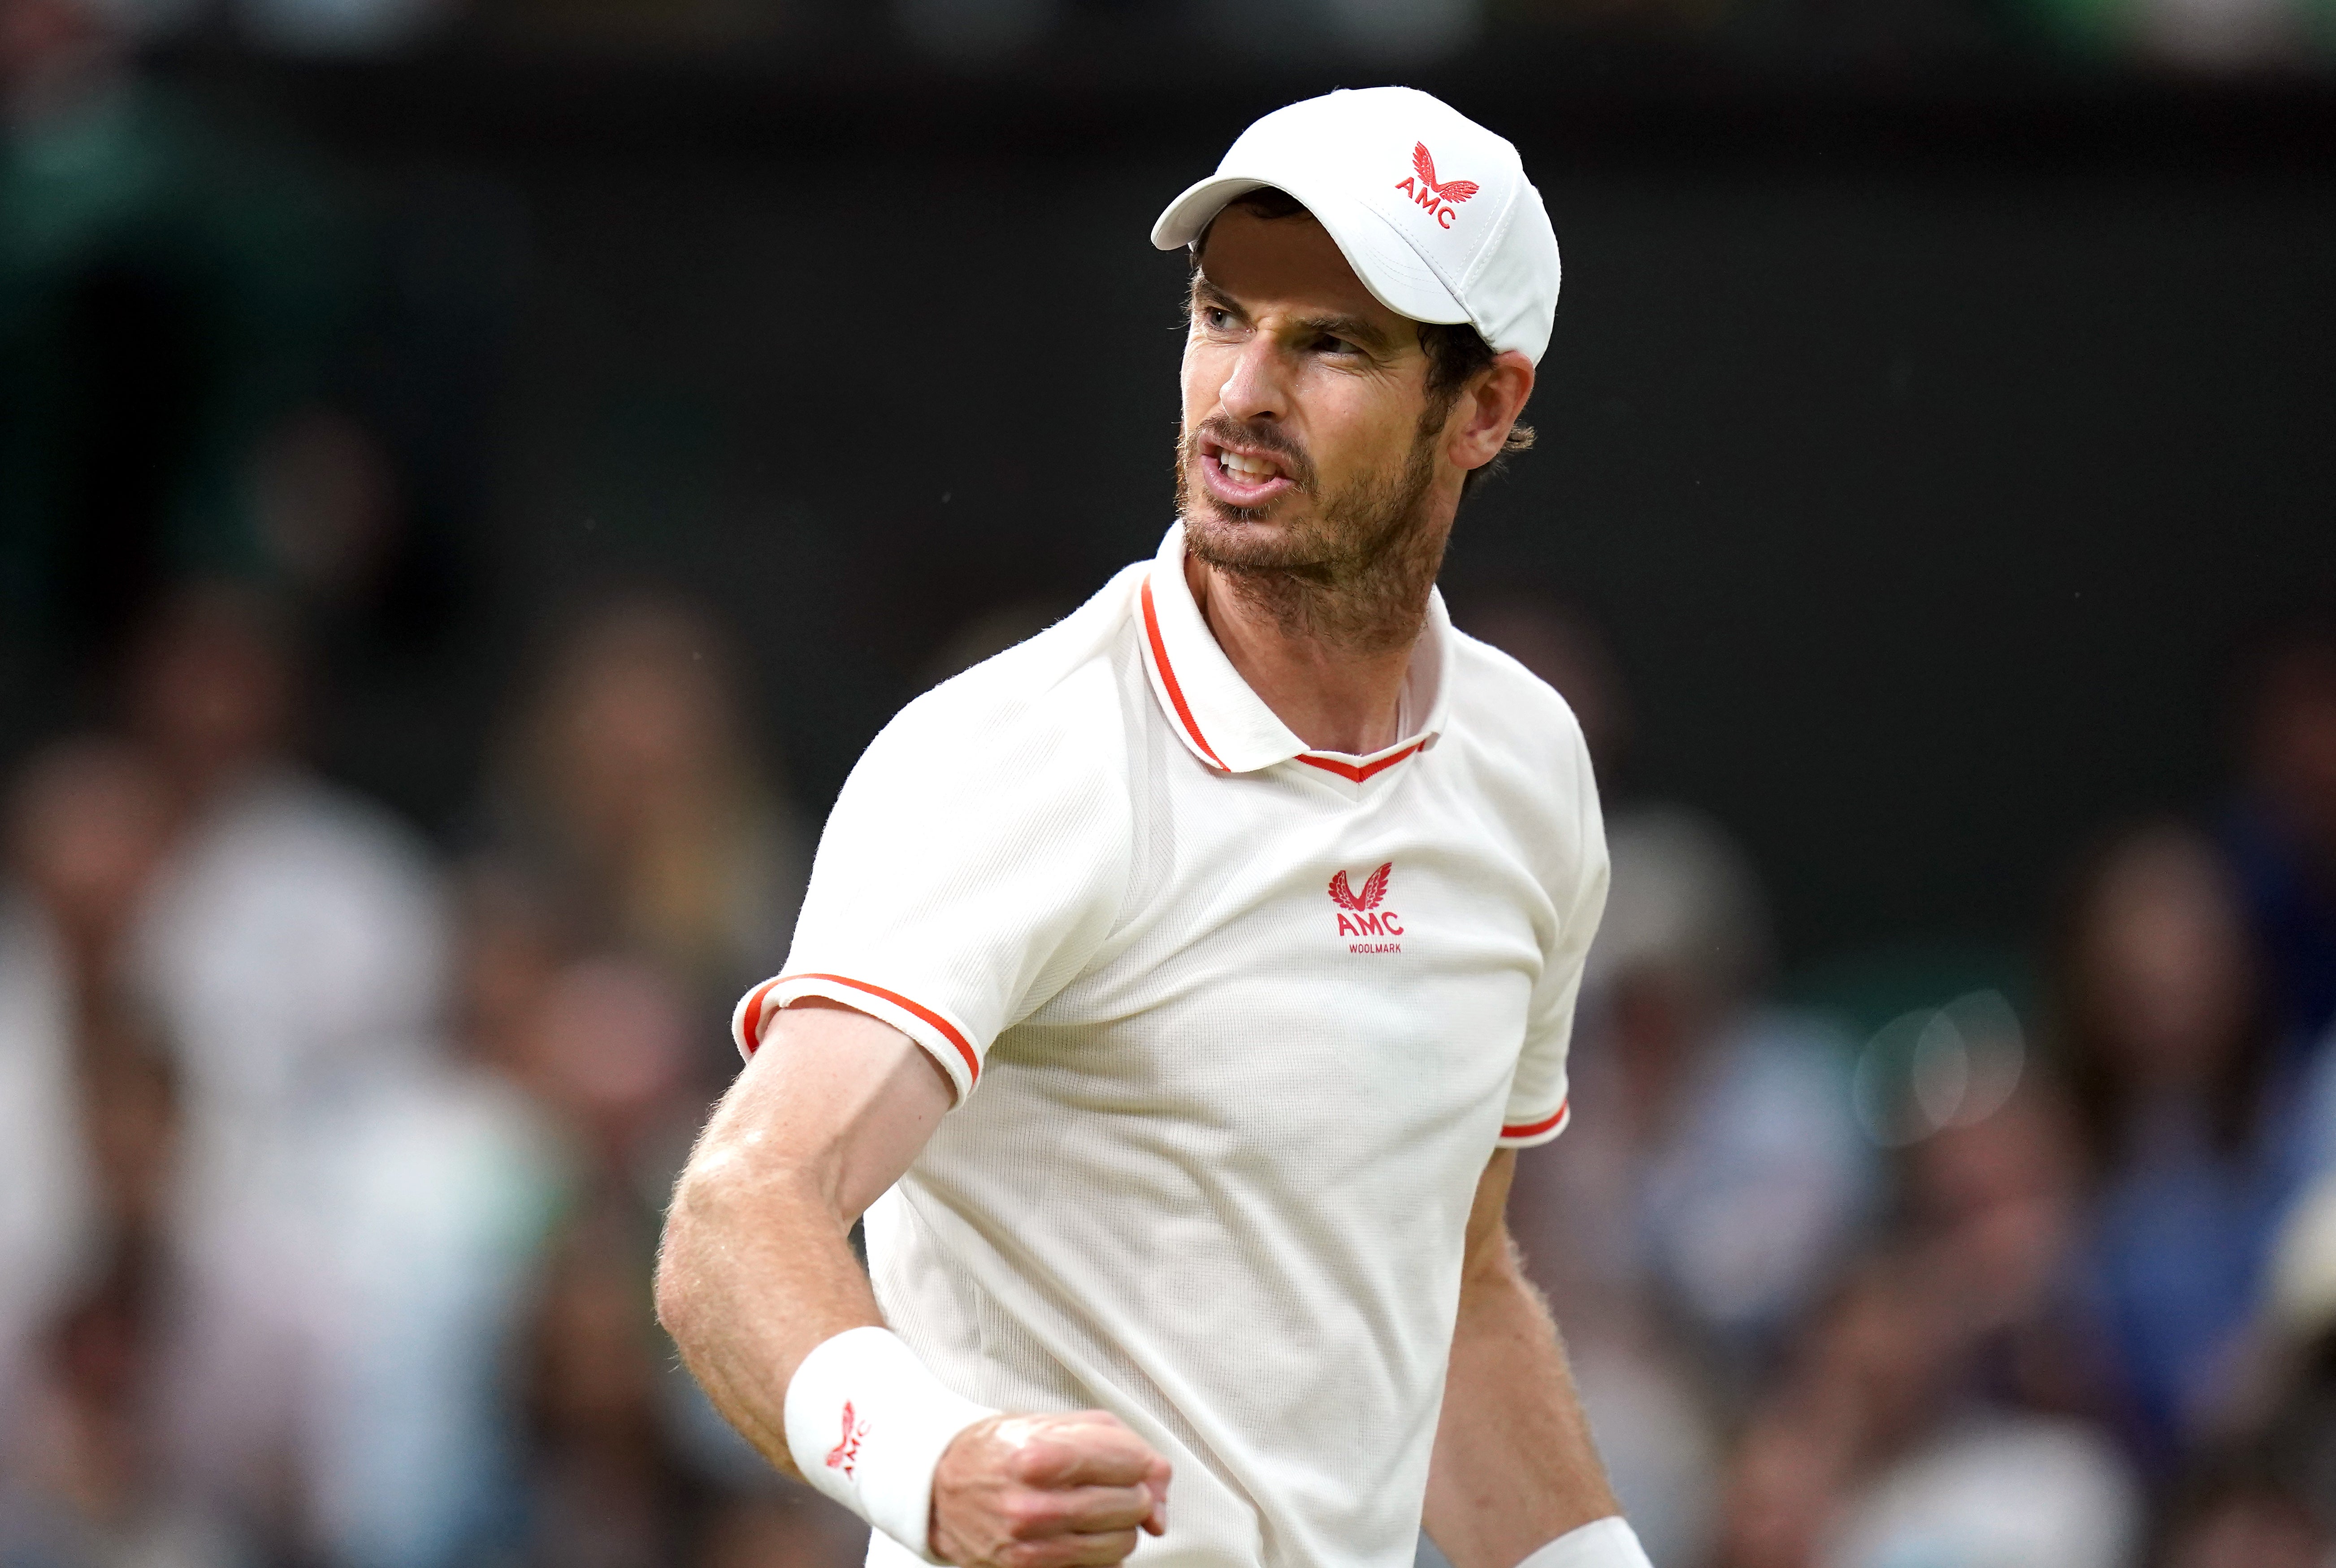 Andy Murray will face Jurij Rodionov